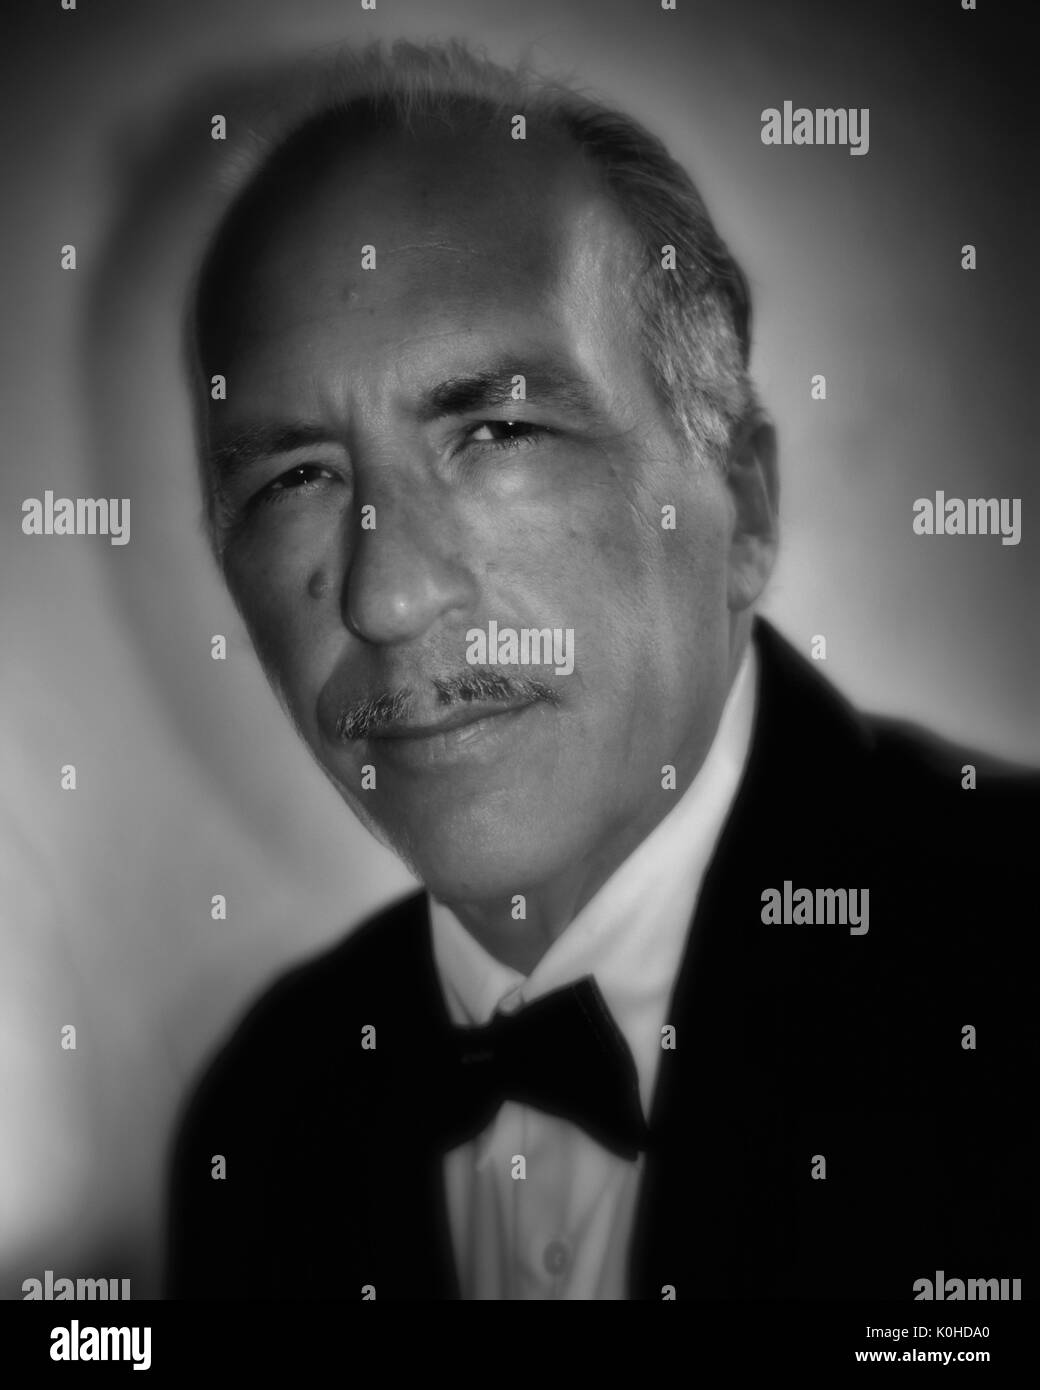 Portrait of an older white man in formal dress tuxedo, slicked back hair and pencil mustache, looking at camera with black/ white old hollywood feel Stock Photo